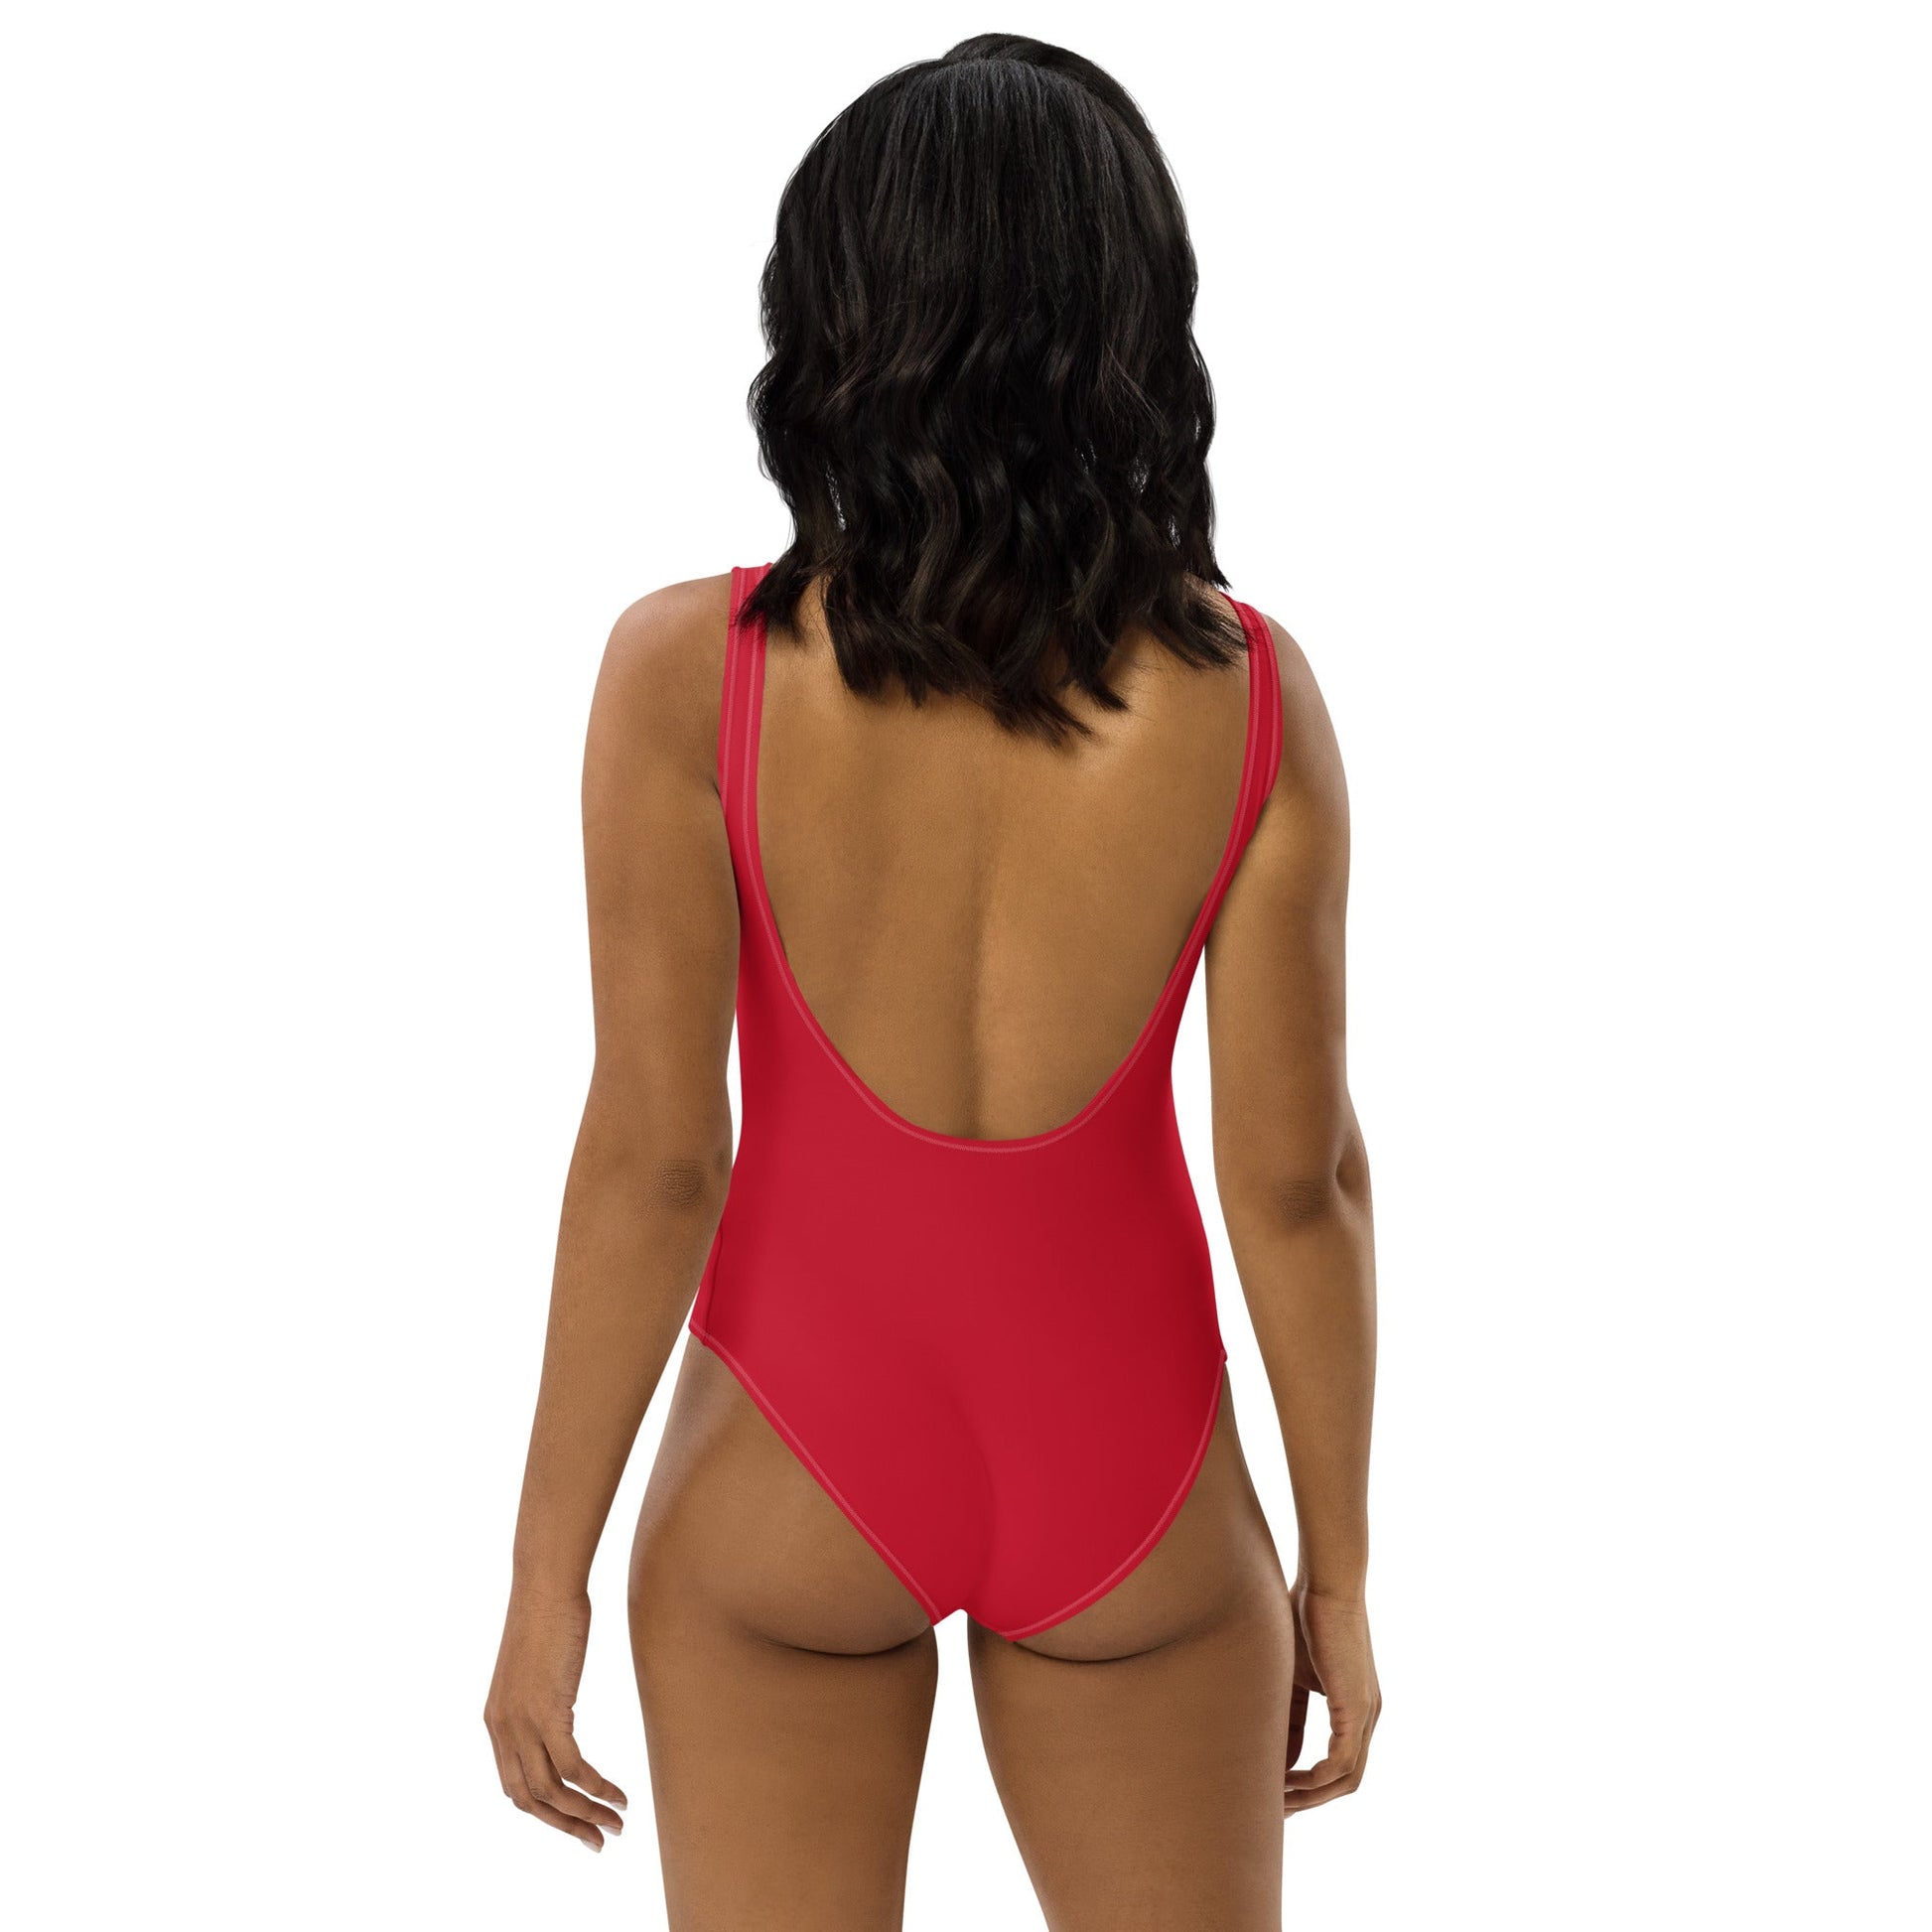 Kennedy for President Flag One - Piece Swimsuit - TEAM KENNEDY. All rights reserved